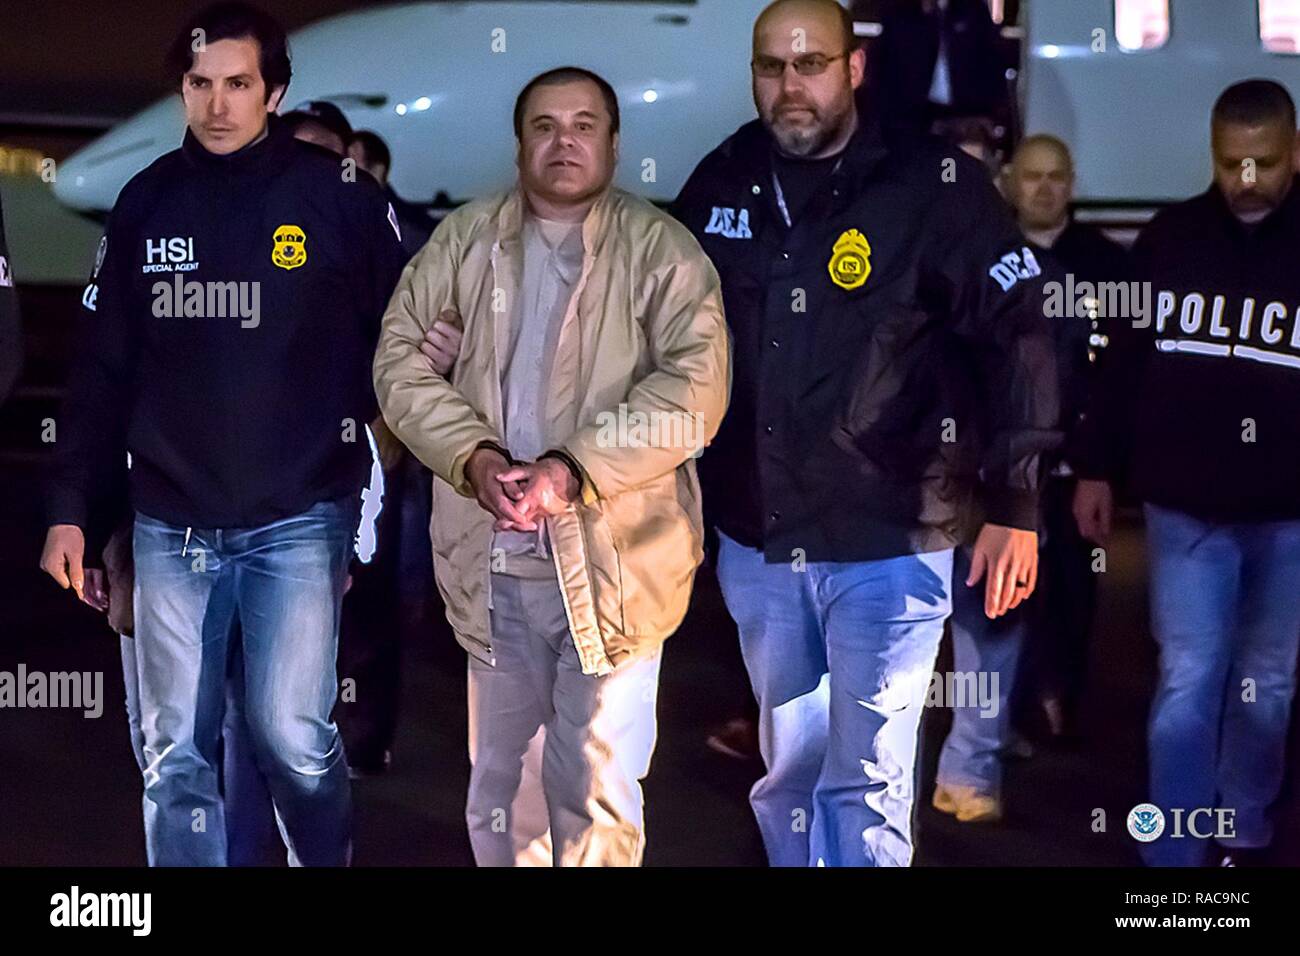 BROOKLYN, New York – Federal authorities announced Friday that Joaquin Archivaldo Guzman Loera, known by various aliases including, “El Chapo,” will face charges filed in Brooklyn, New York, following his extradition to the United States from Mexico. Guzman Loera arrived in New York late Thursday under heavy escort by special agents with U.S. Immigration and Customs Enforcement’s (ICE) Homeland Security Investigations and the Drug Enforcement Administration (DEA) and other authorities. Stock Photo